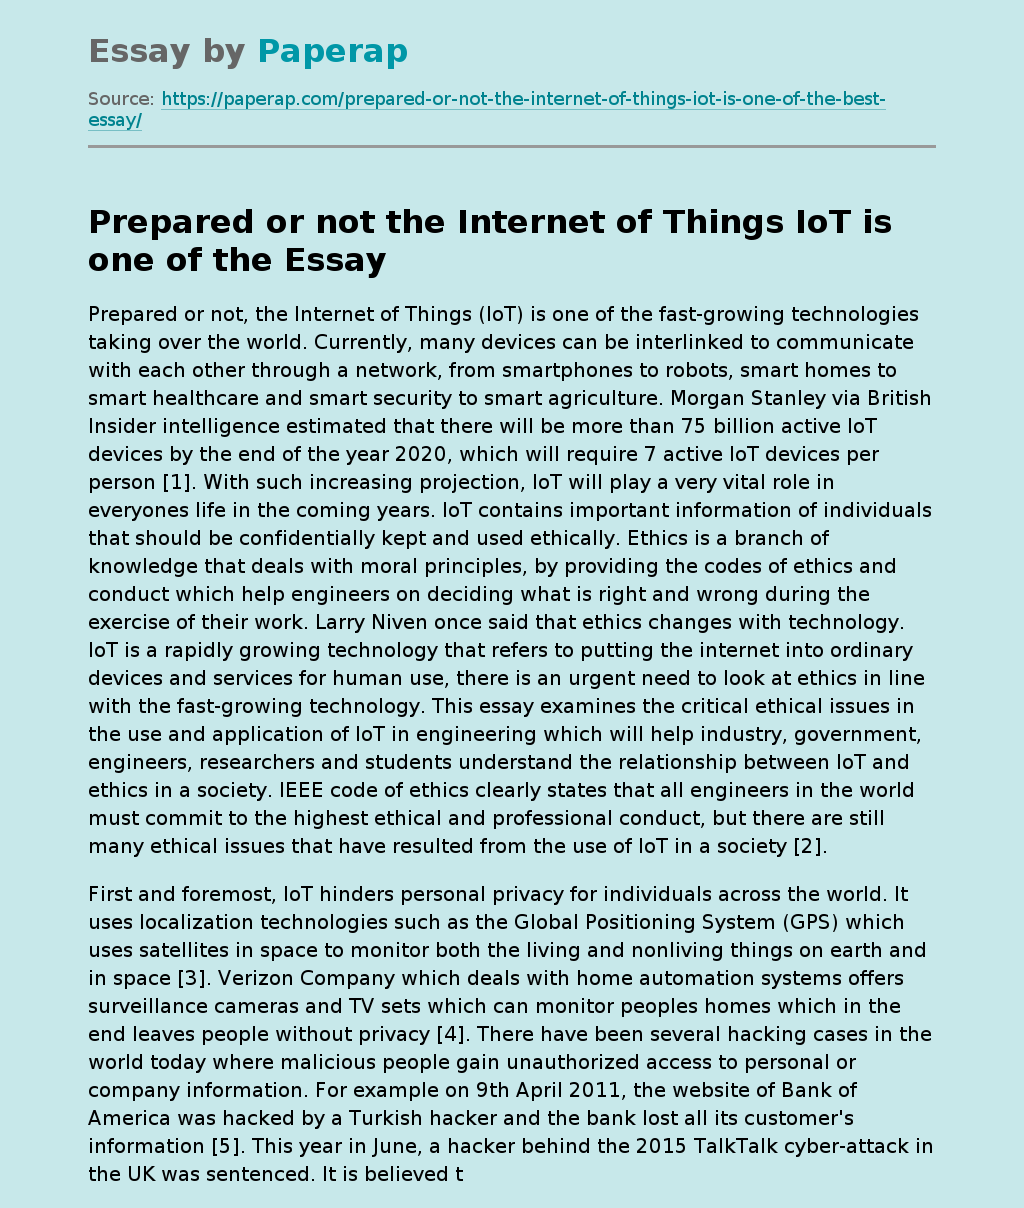 Prepared or not the Internet of Things IoT is one of the